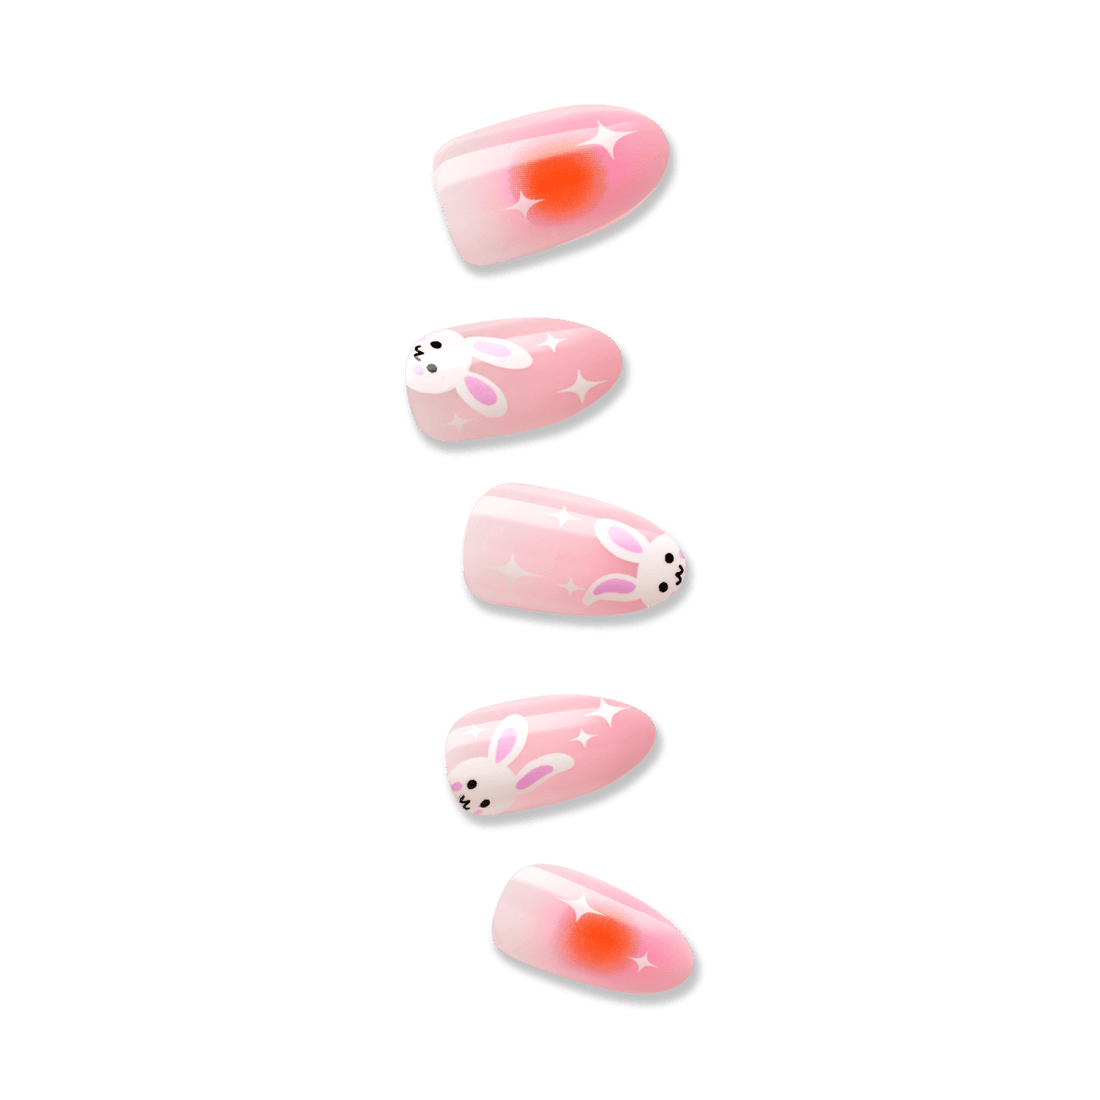 imPRESS nails in almond shapes painted in a medium pink. 3 nails each feature bunny illustrations and 2 have an orange circle